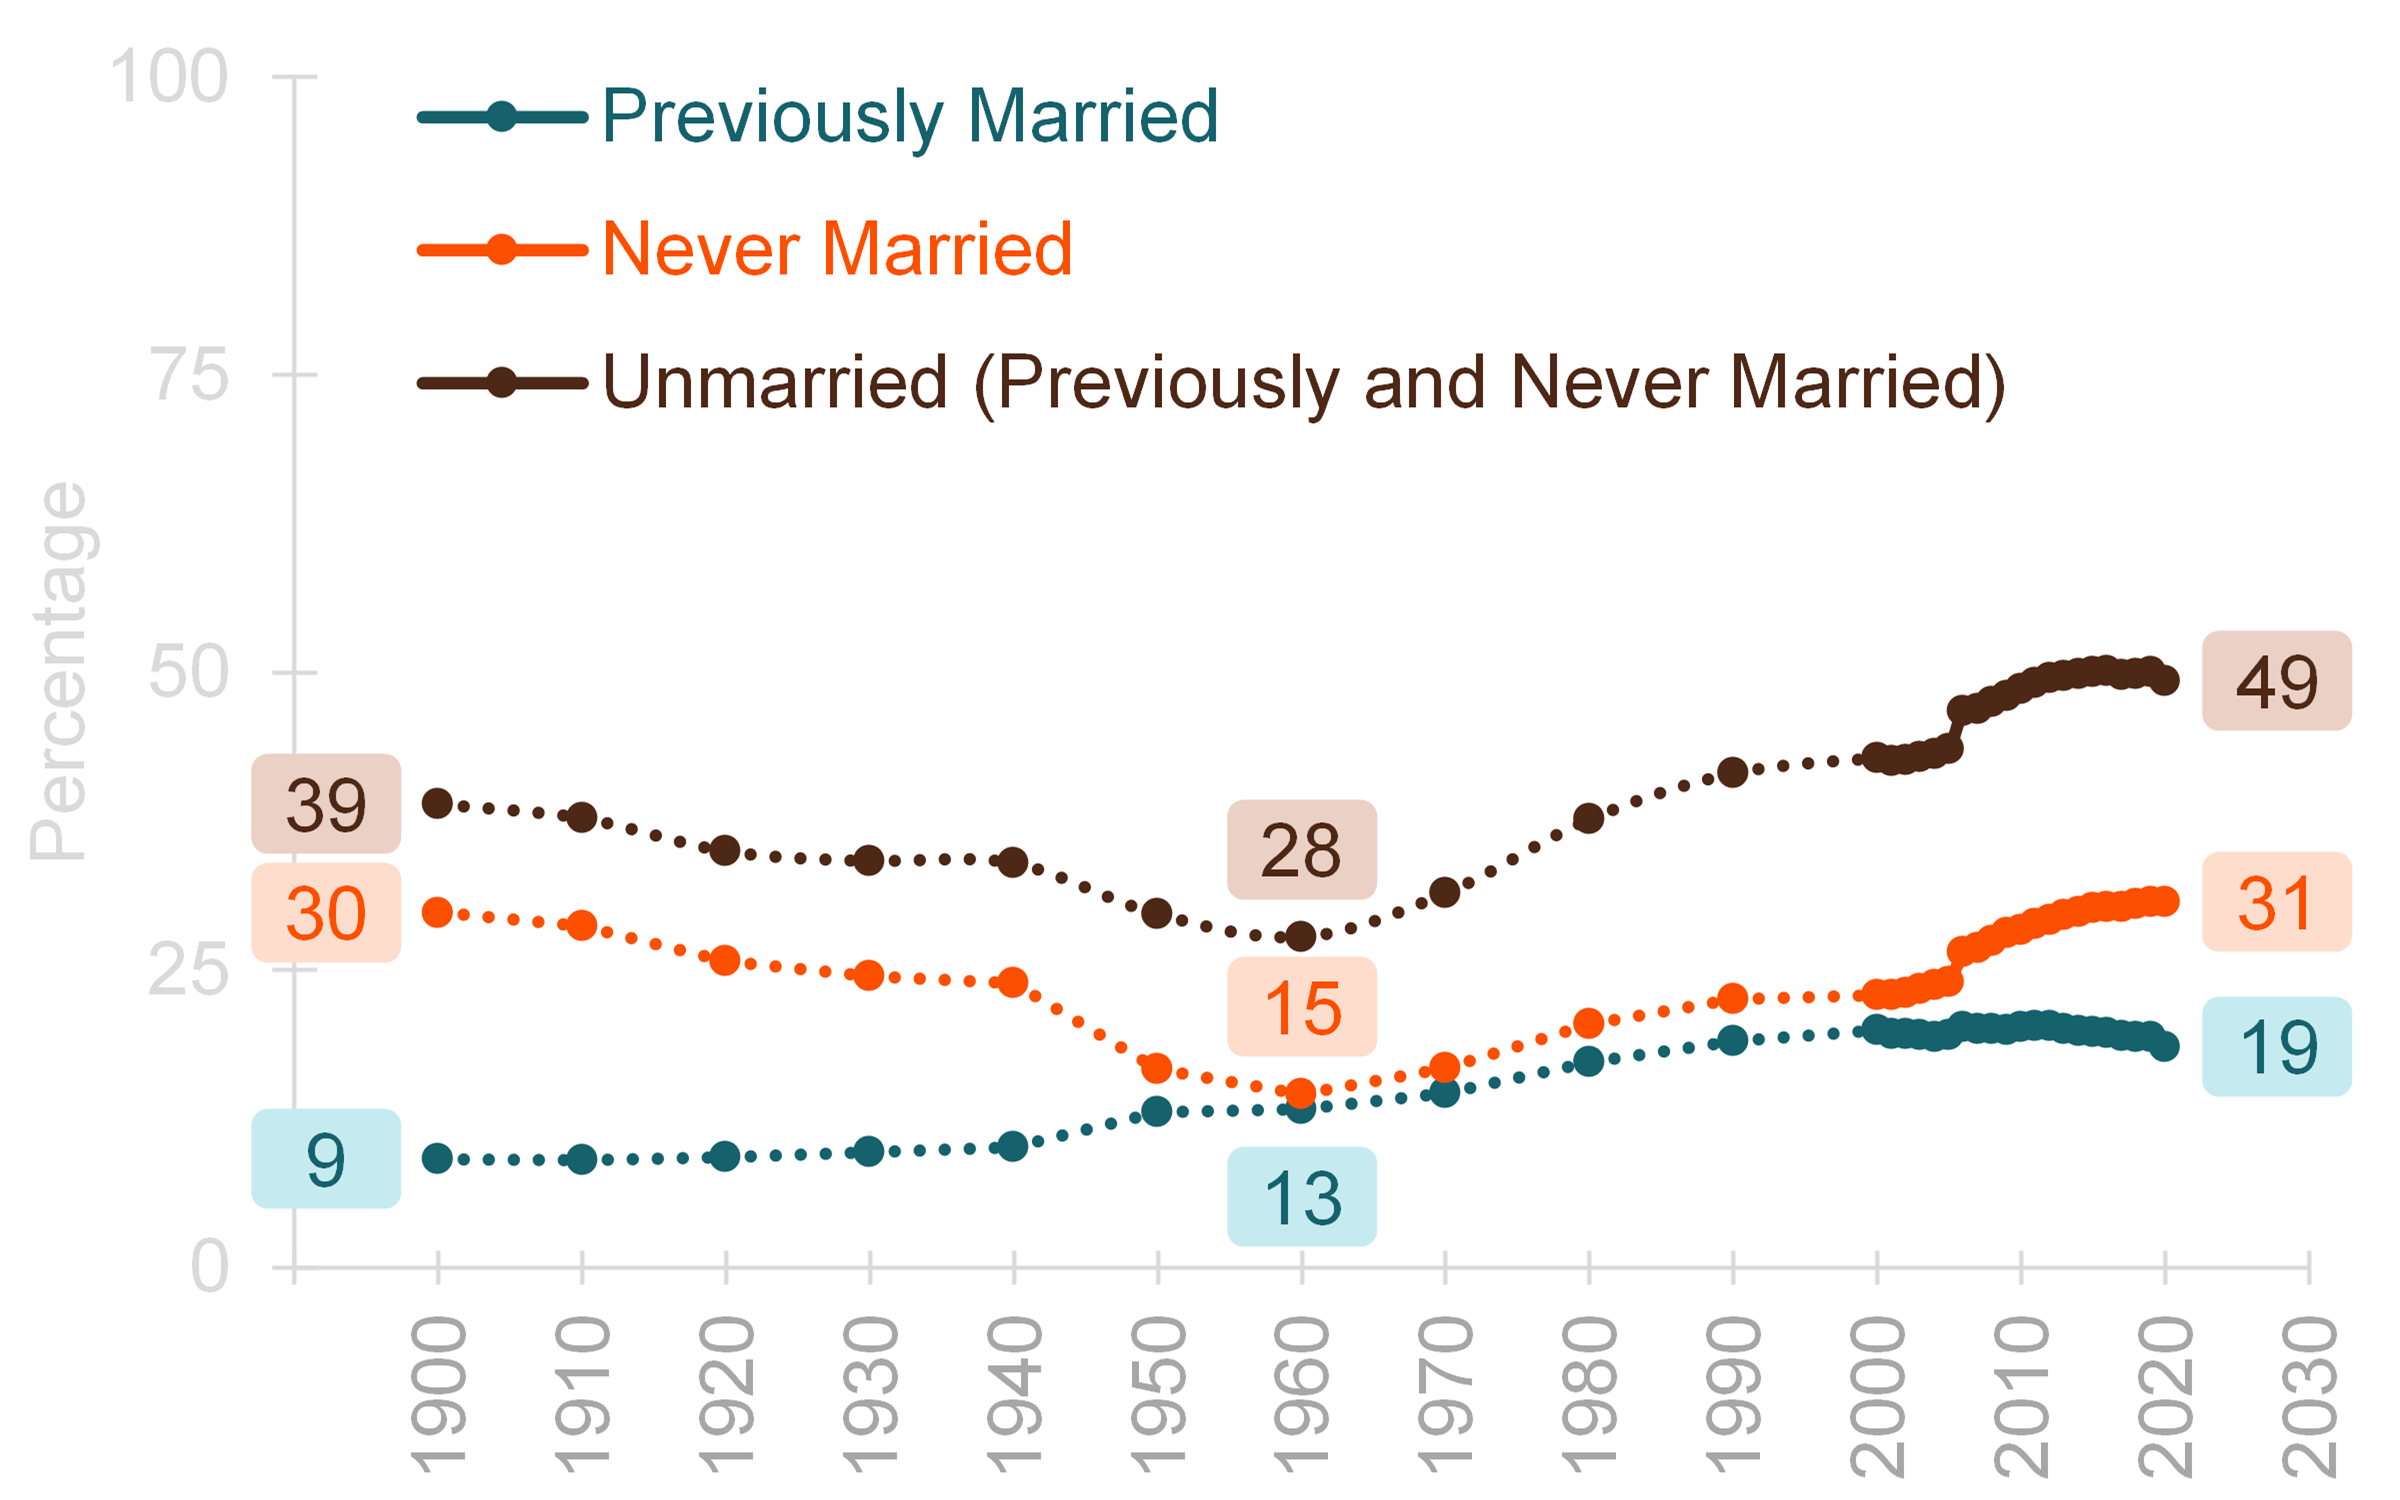 graph showing Figure 1. Percentage of Unmarried Adults in the US, 1900-2020